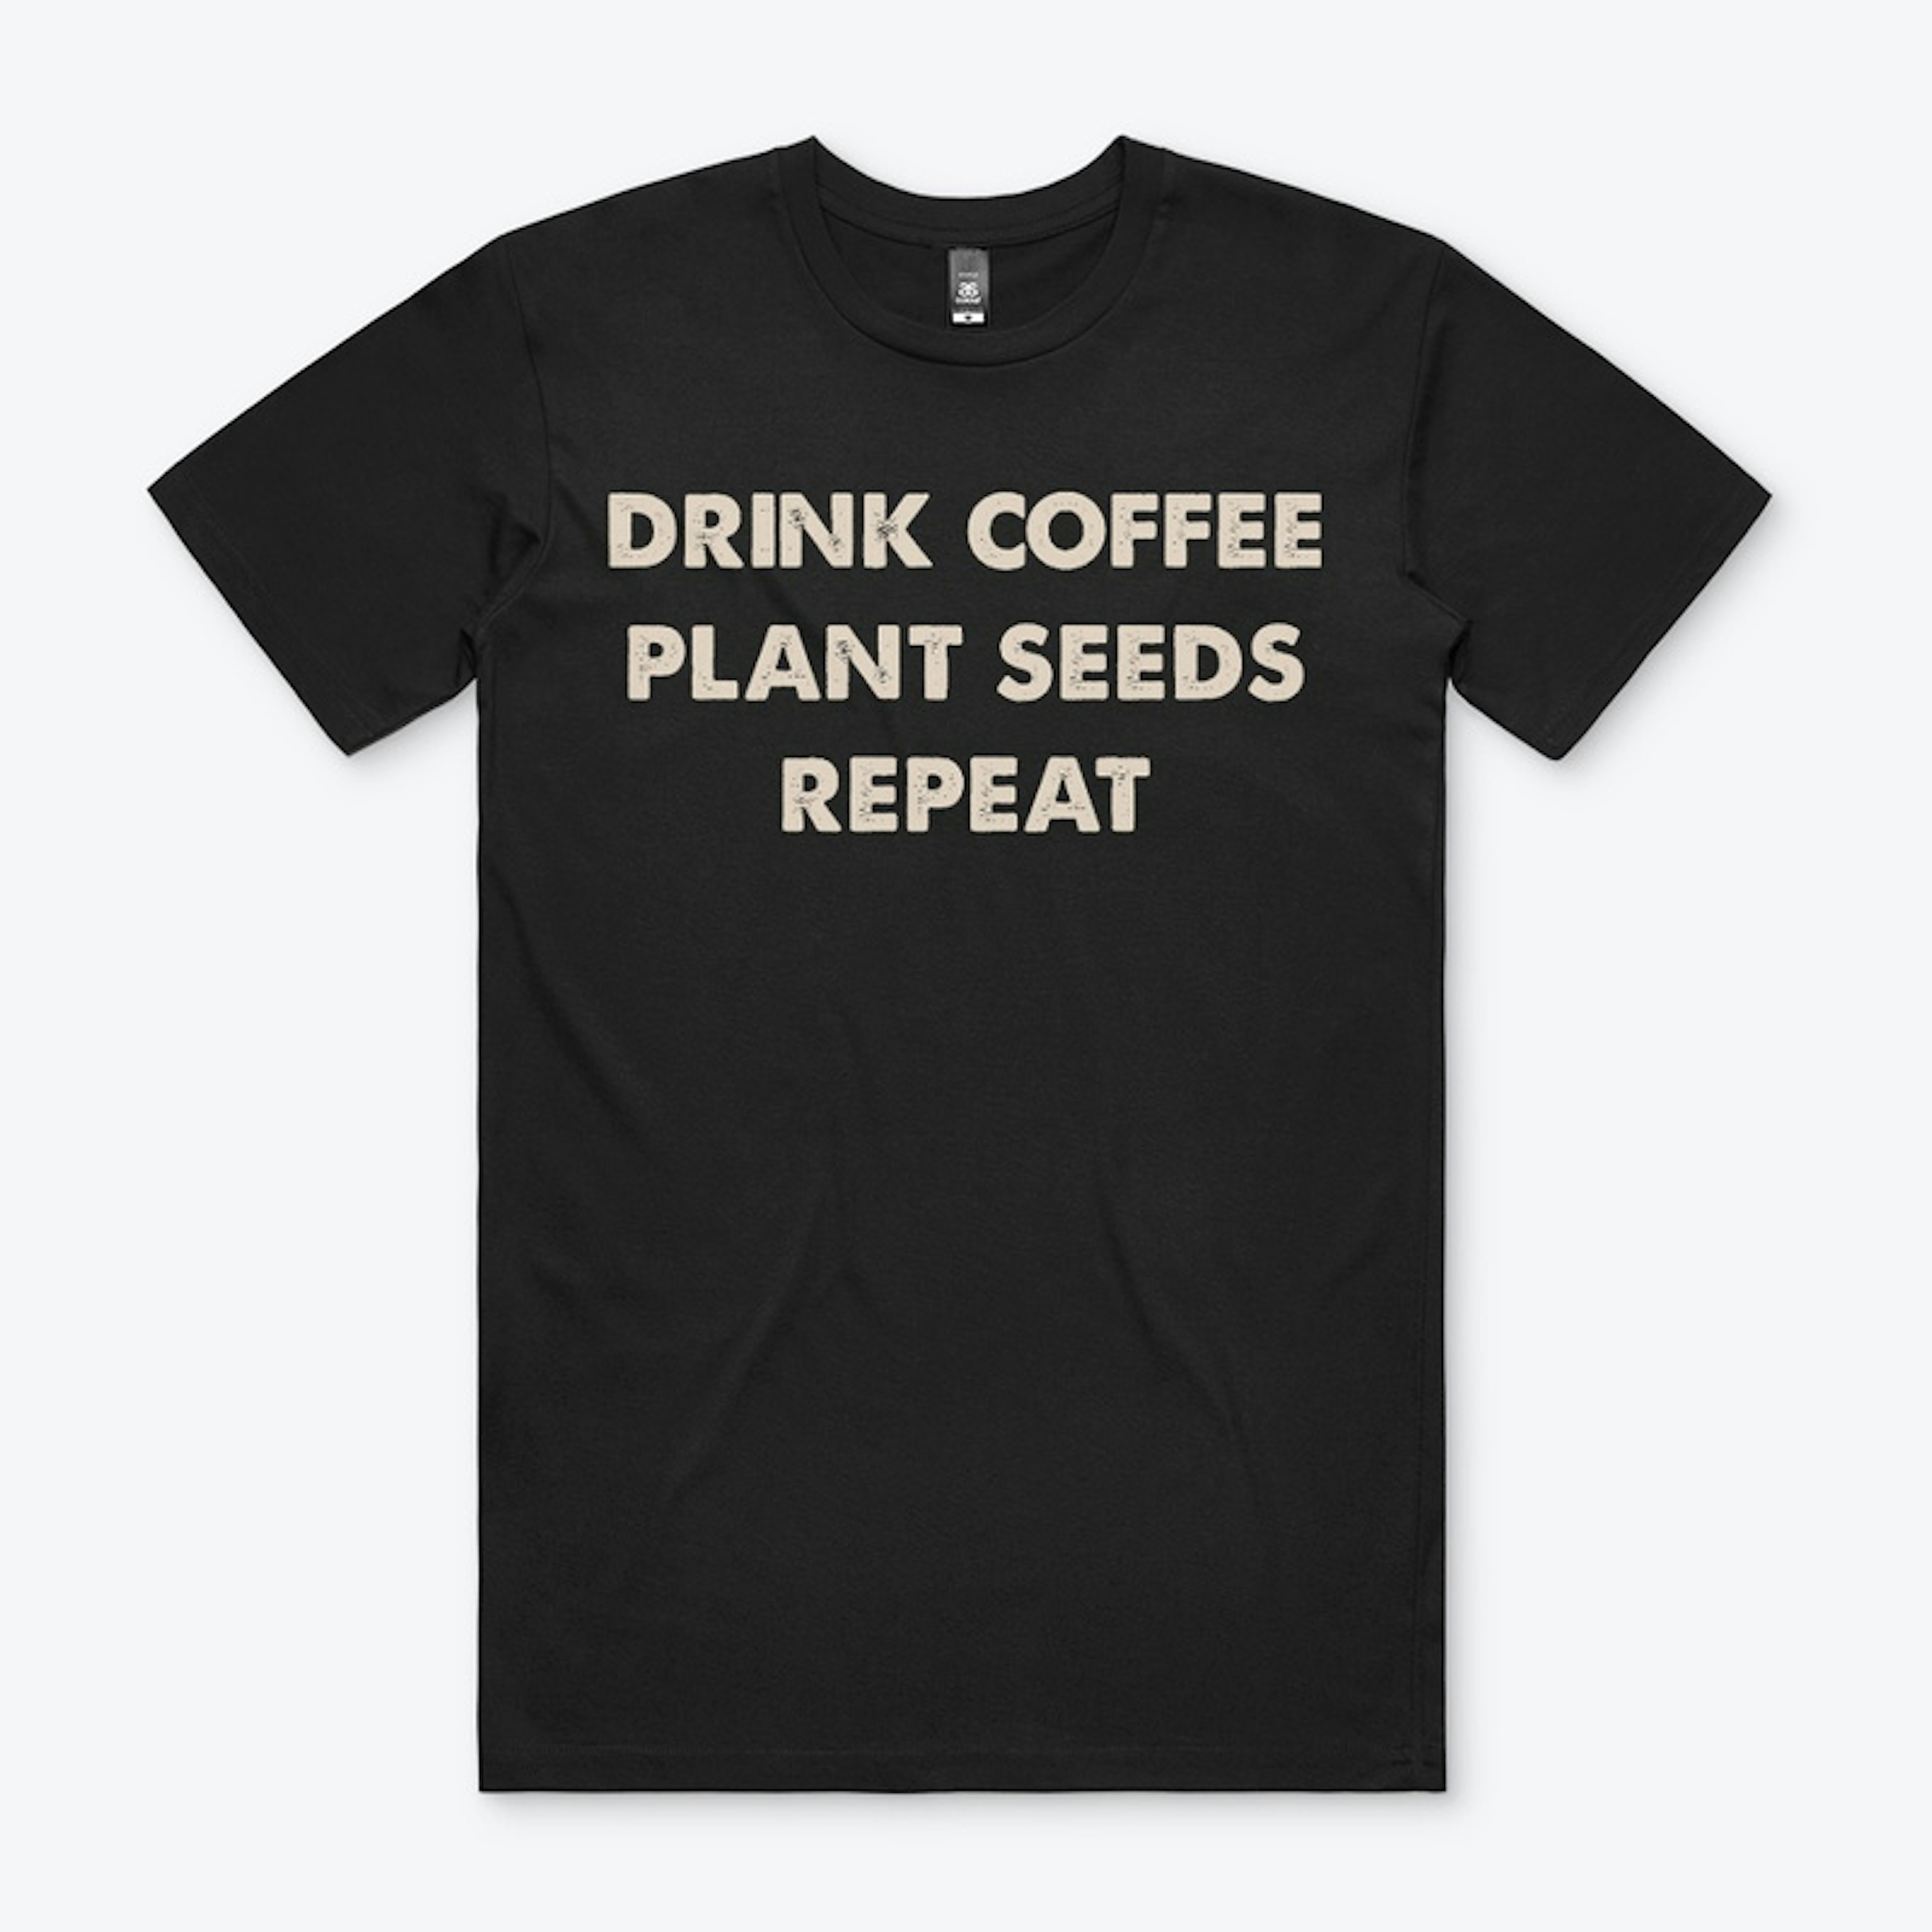 Drink Coffee, Plant Seeds, Repeat